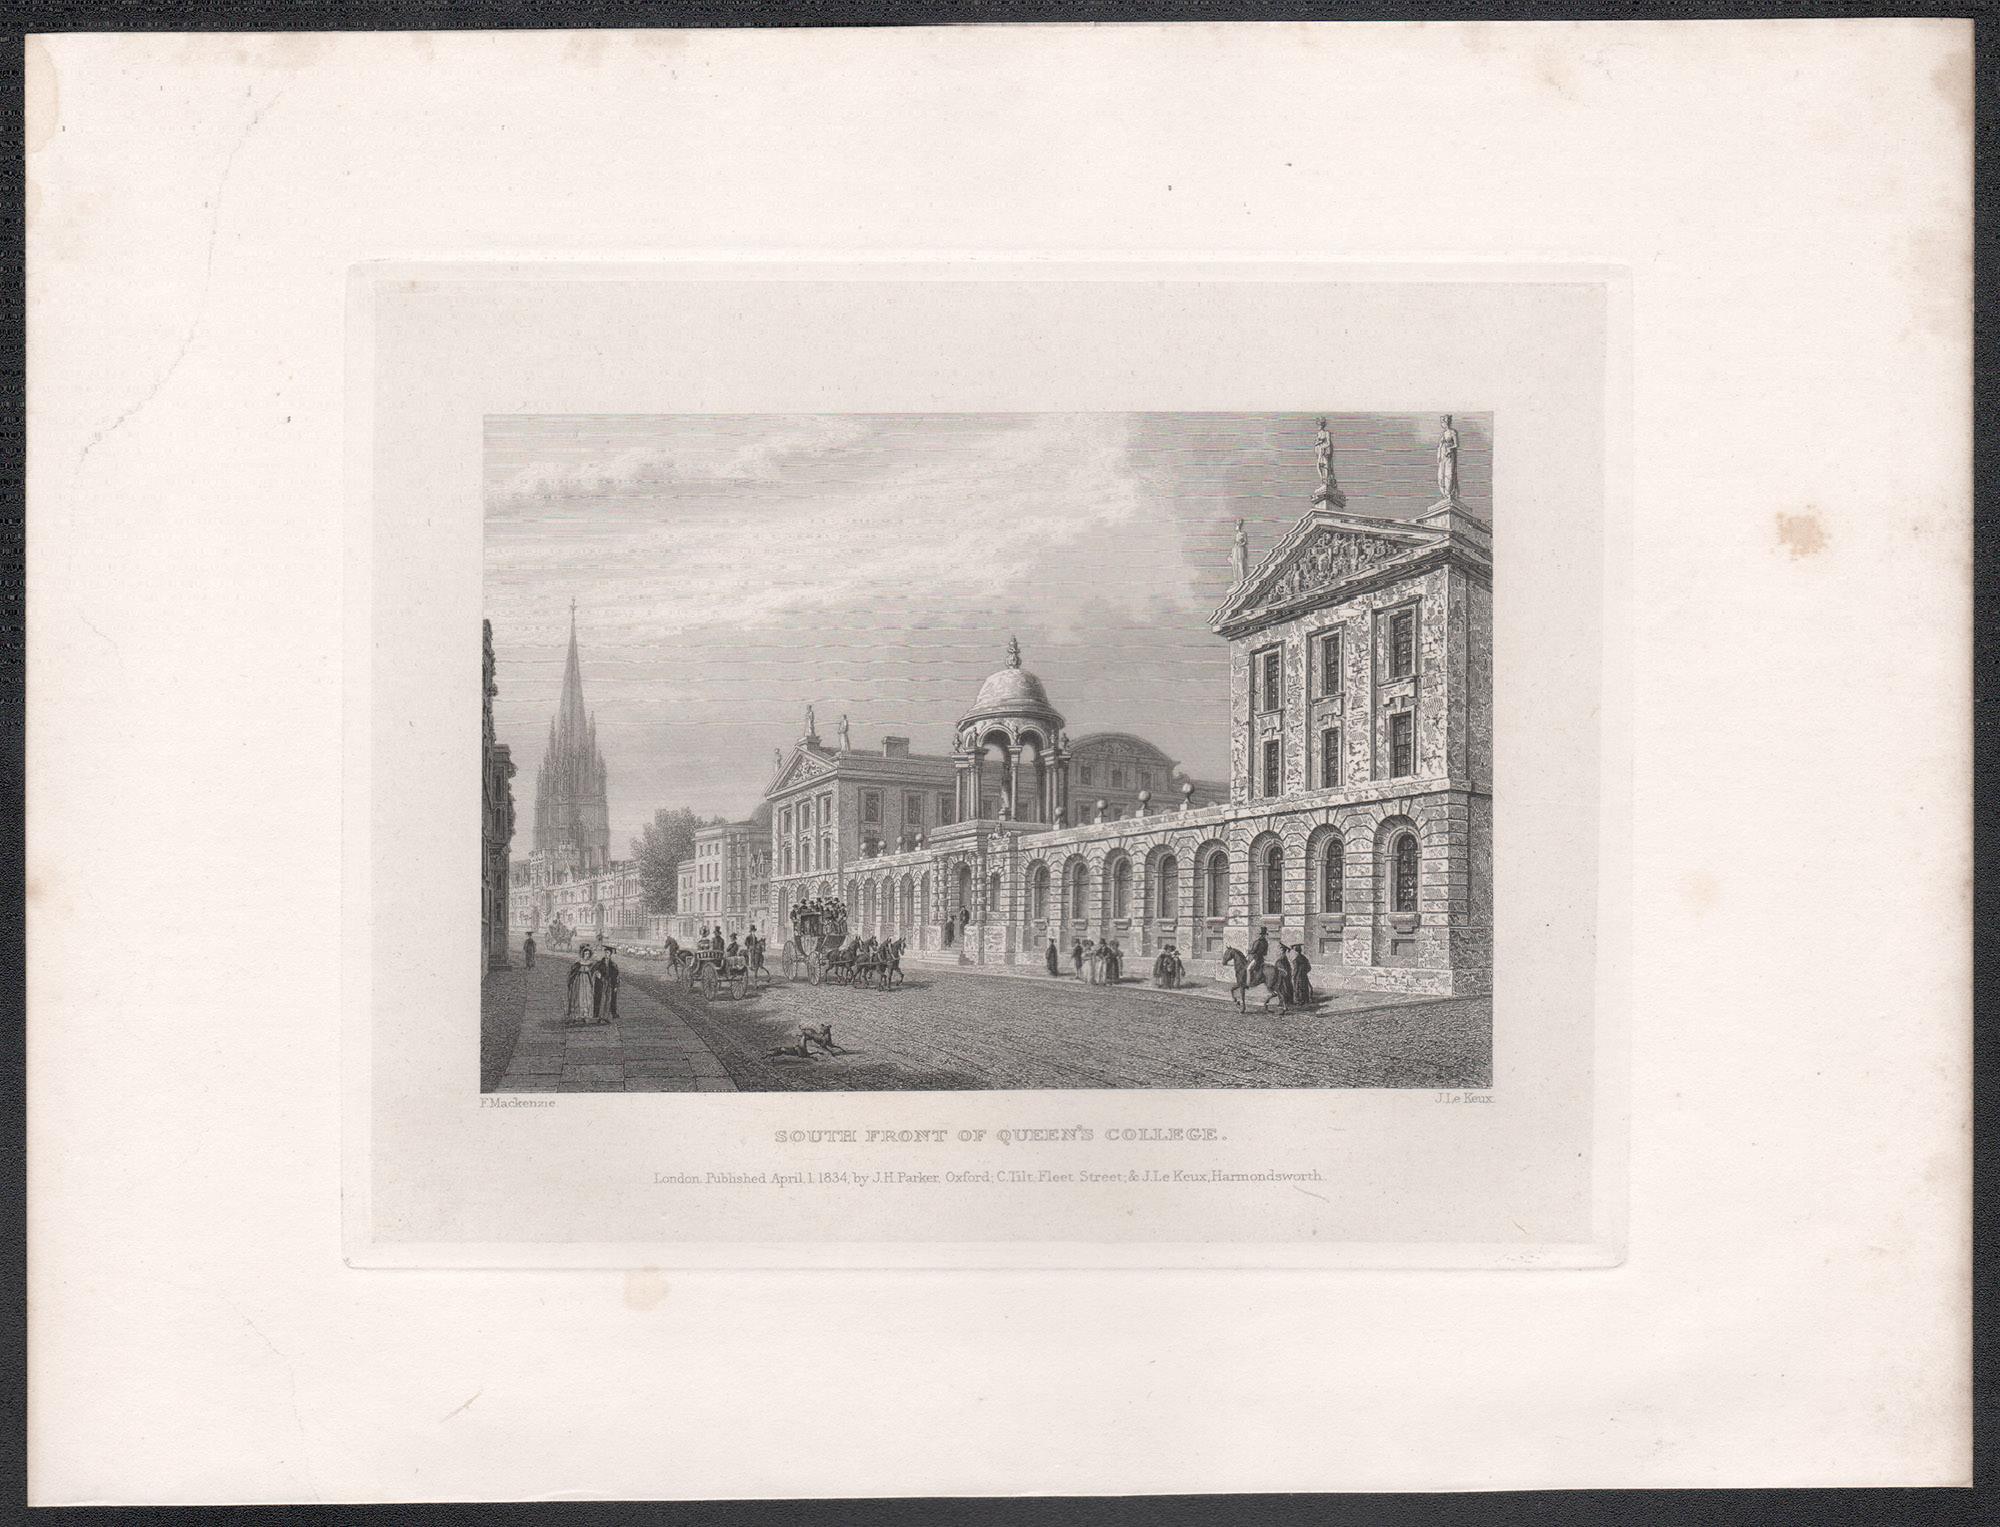 South Front of Queen's College. Oxford University. Antique C19th engraving - Print by John Le Keux after Frederick Mackenzie